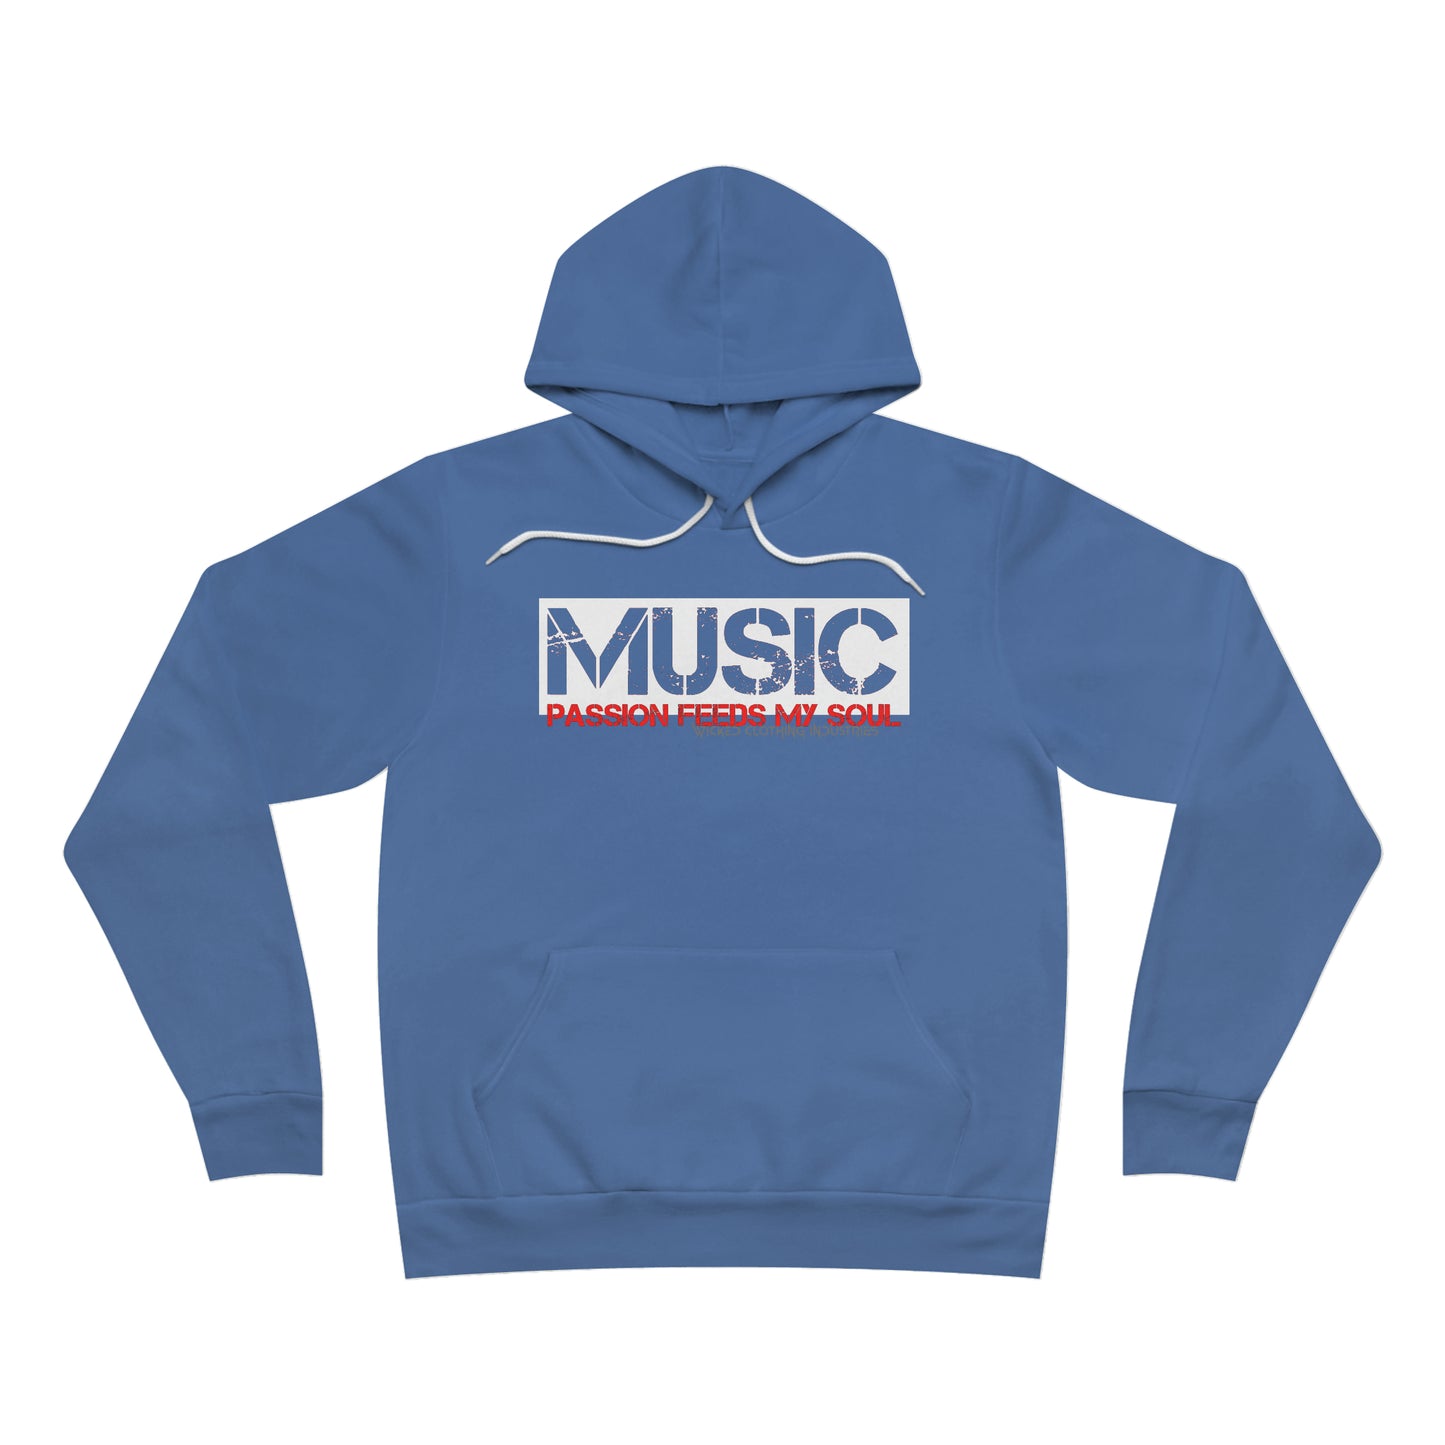 Music Passion Feeds My Soul  Fleece Pullover Hoodie